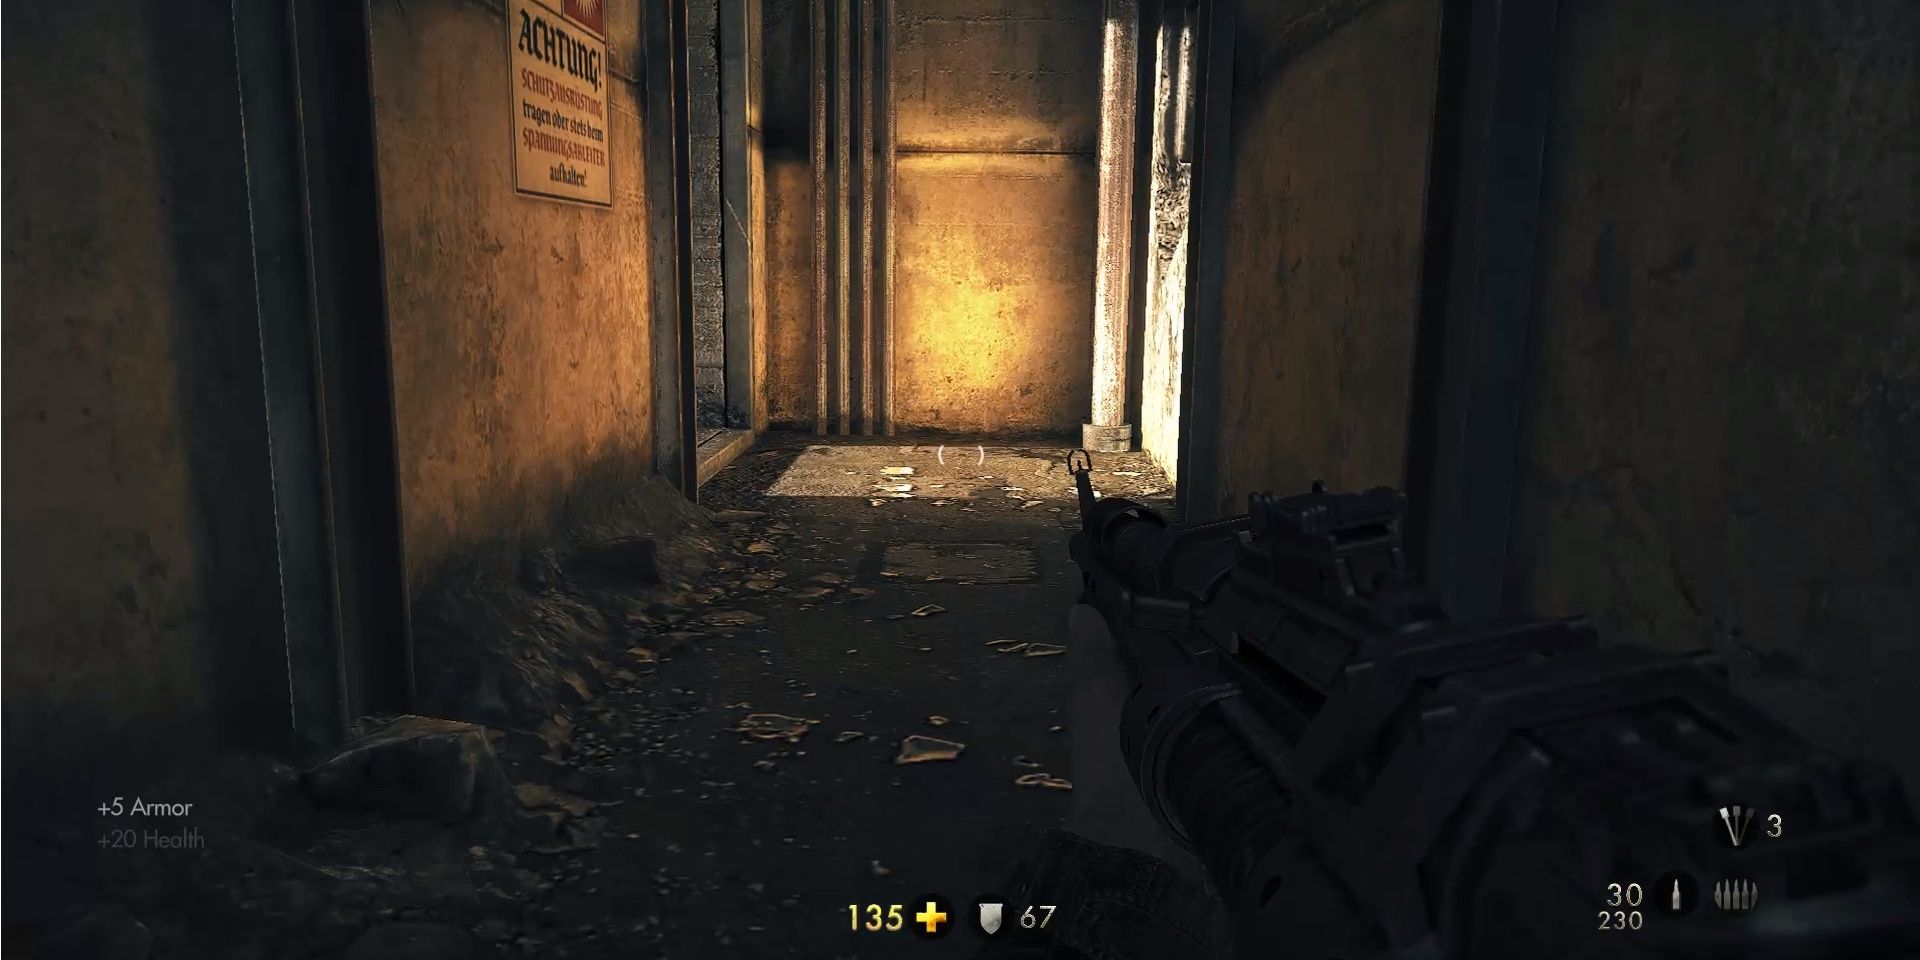 Image of the hallway that you will exit to the left in Wolfenstein: The New Order.